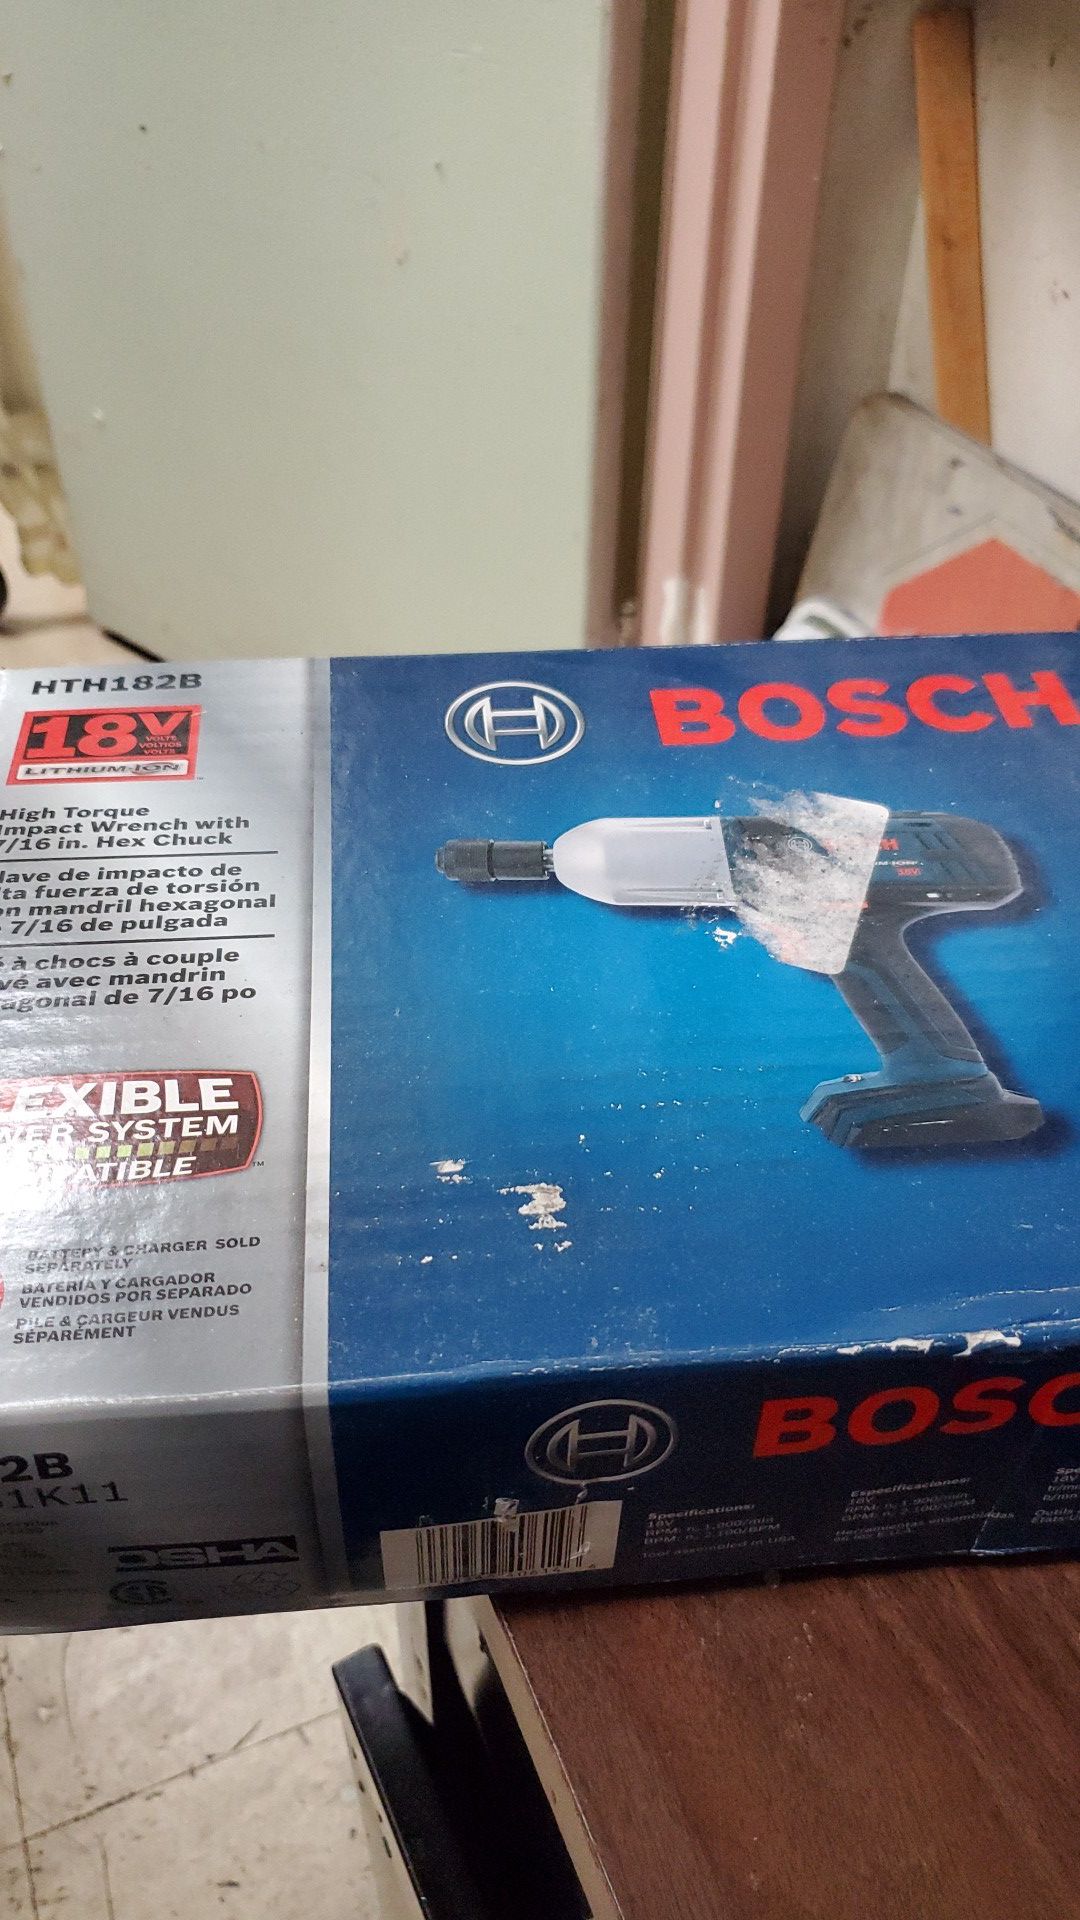 Bosch high torque impact wrench with 7/16in. Hex Chuck